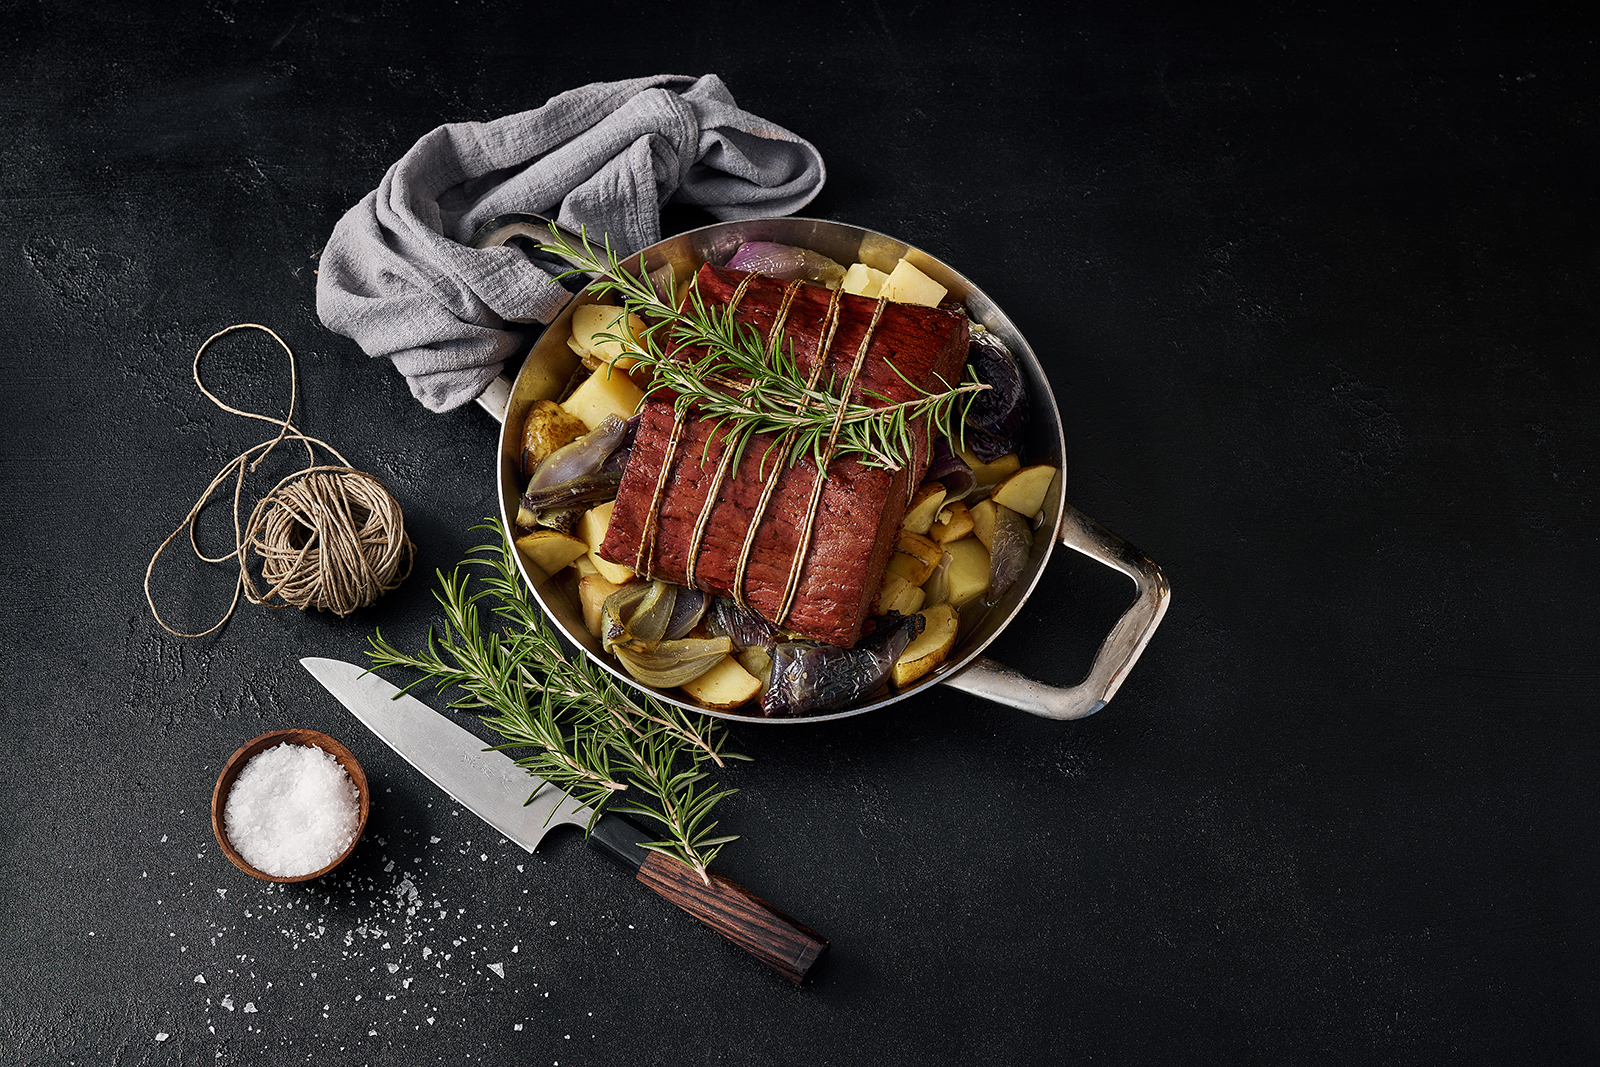 New-Meat has received glowing praise from leading European chefs. Photo via Redefine Meat.